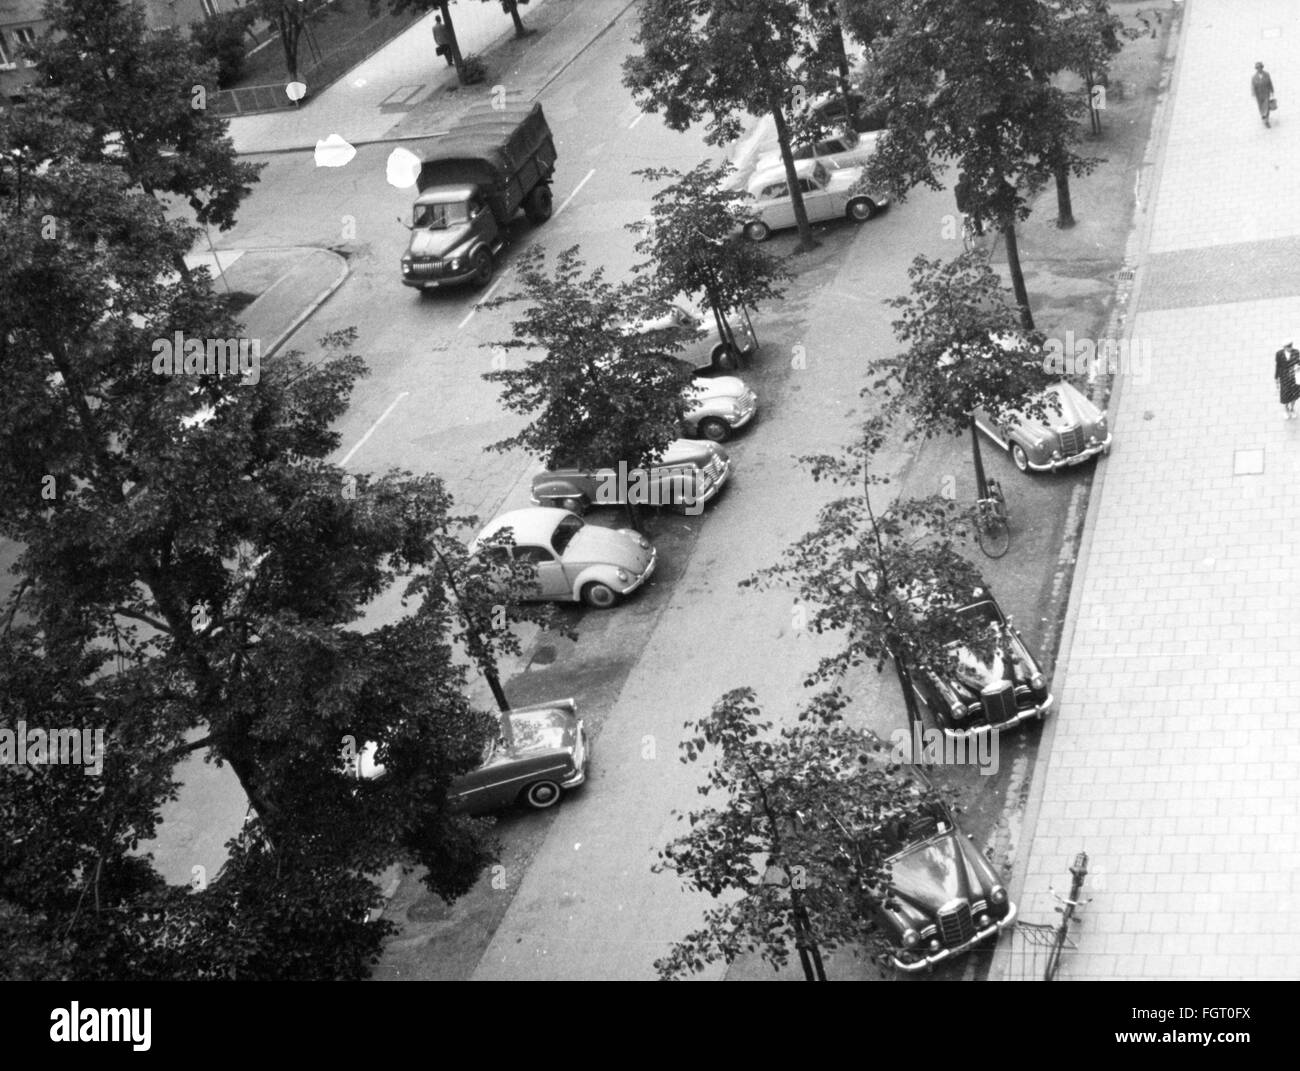 transport / transportation, car, parking, parking cars besides a street in Munich, 1950s, Additional-Rights-Clearences-Not Available Stock Photo